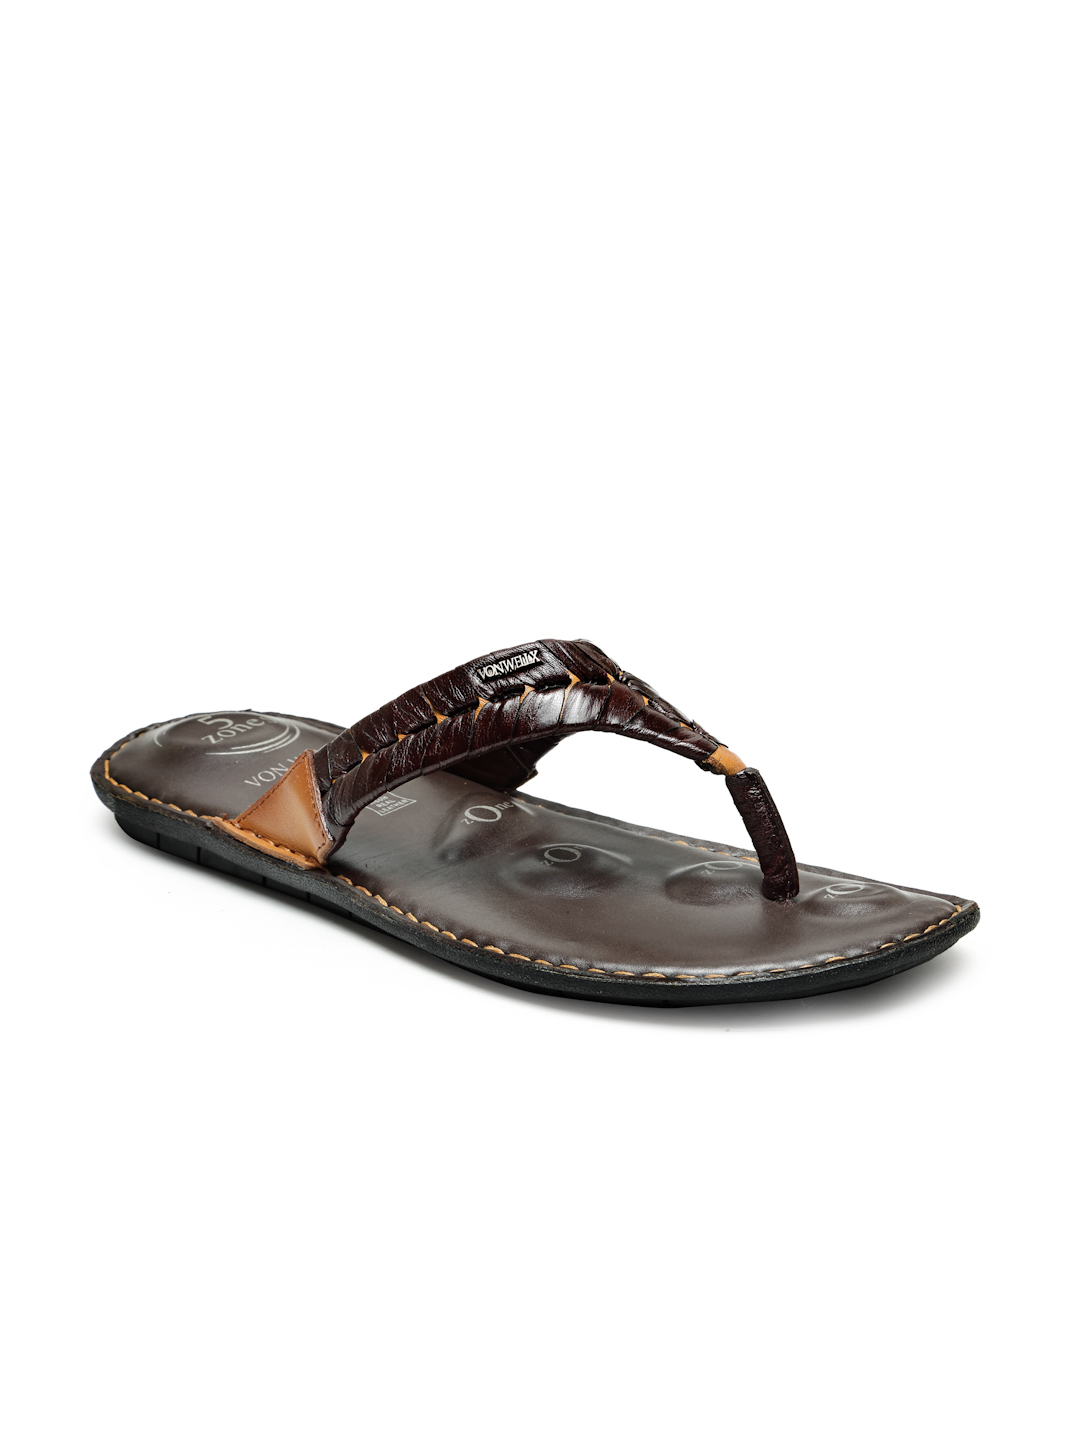 Buy Von Wellx Germany Comfort Men's Tan Slippers Alonso Online in Ahmedabad